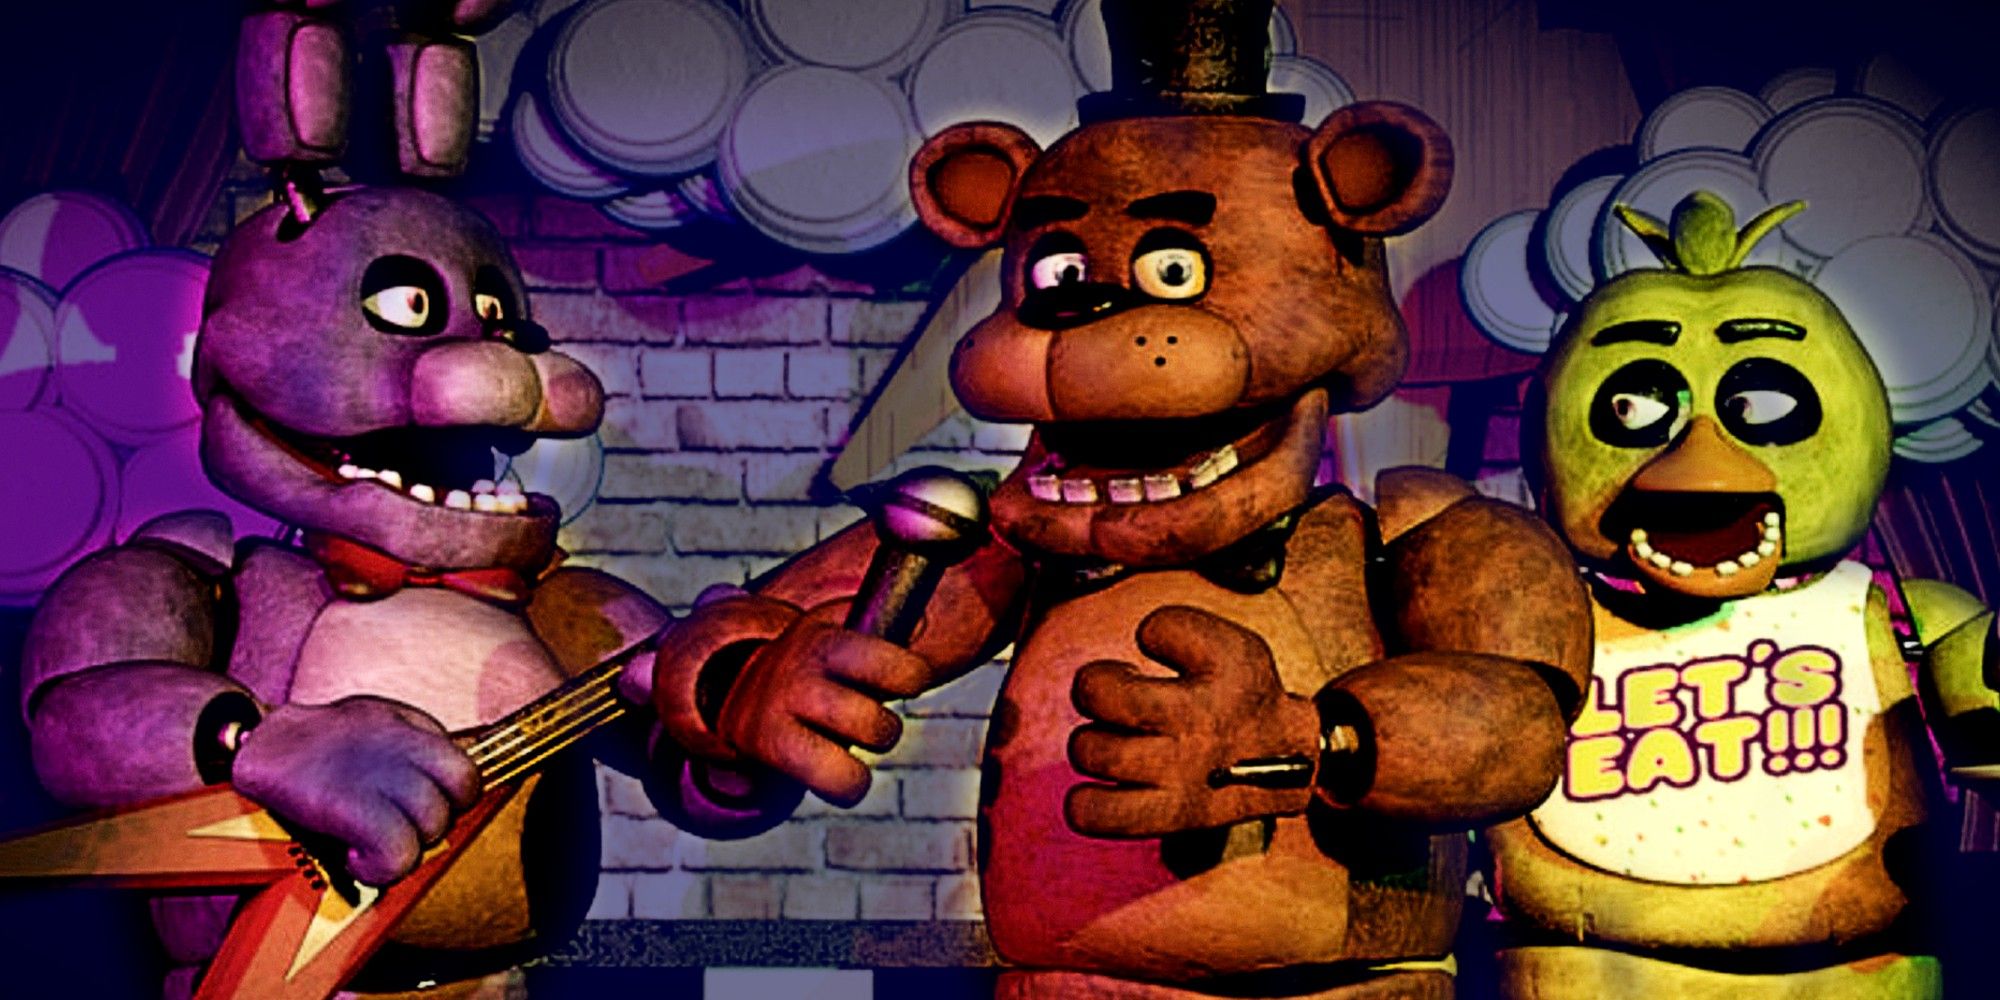 Five Nights at Freddy's Movie Gets Runtime Update Amid 3-Hour